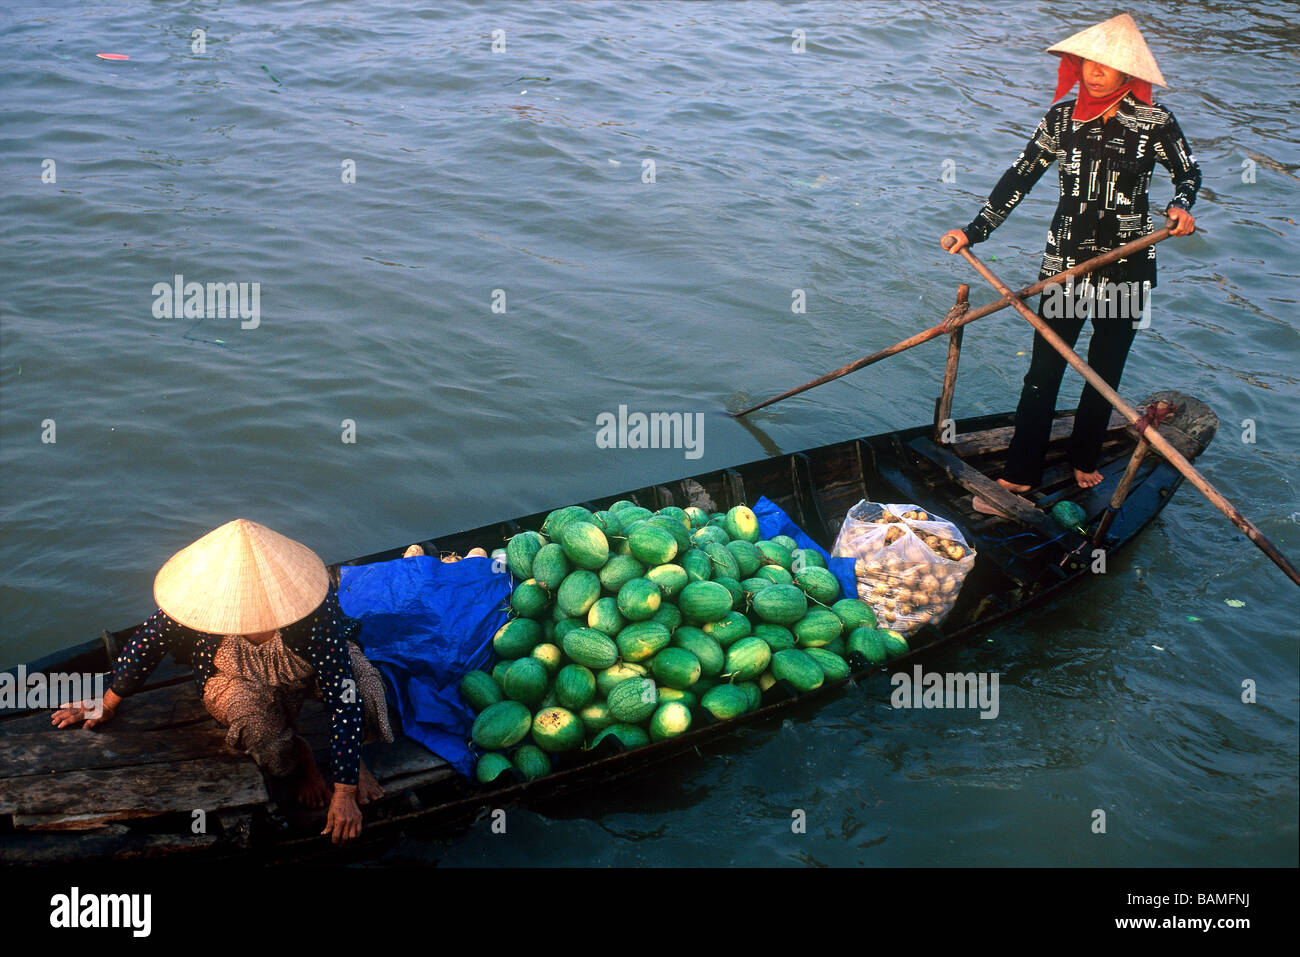 Vietnam, Can Tho Province, Mekong Delta, Can Tho, floating market of Cai Rang, watermelon saleswoman Stock Photo